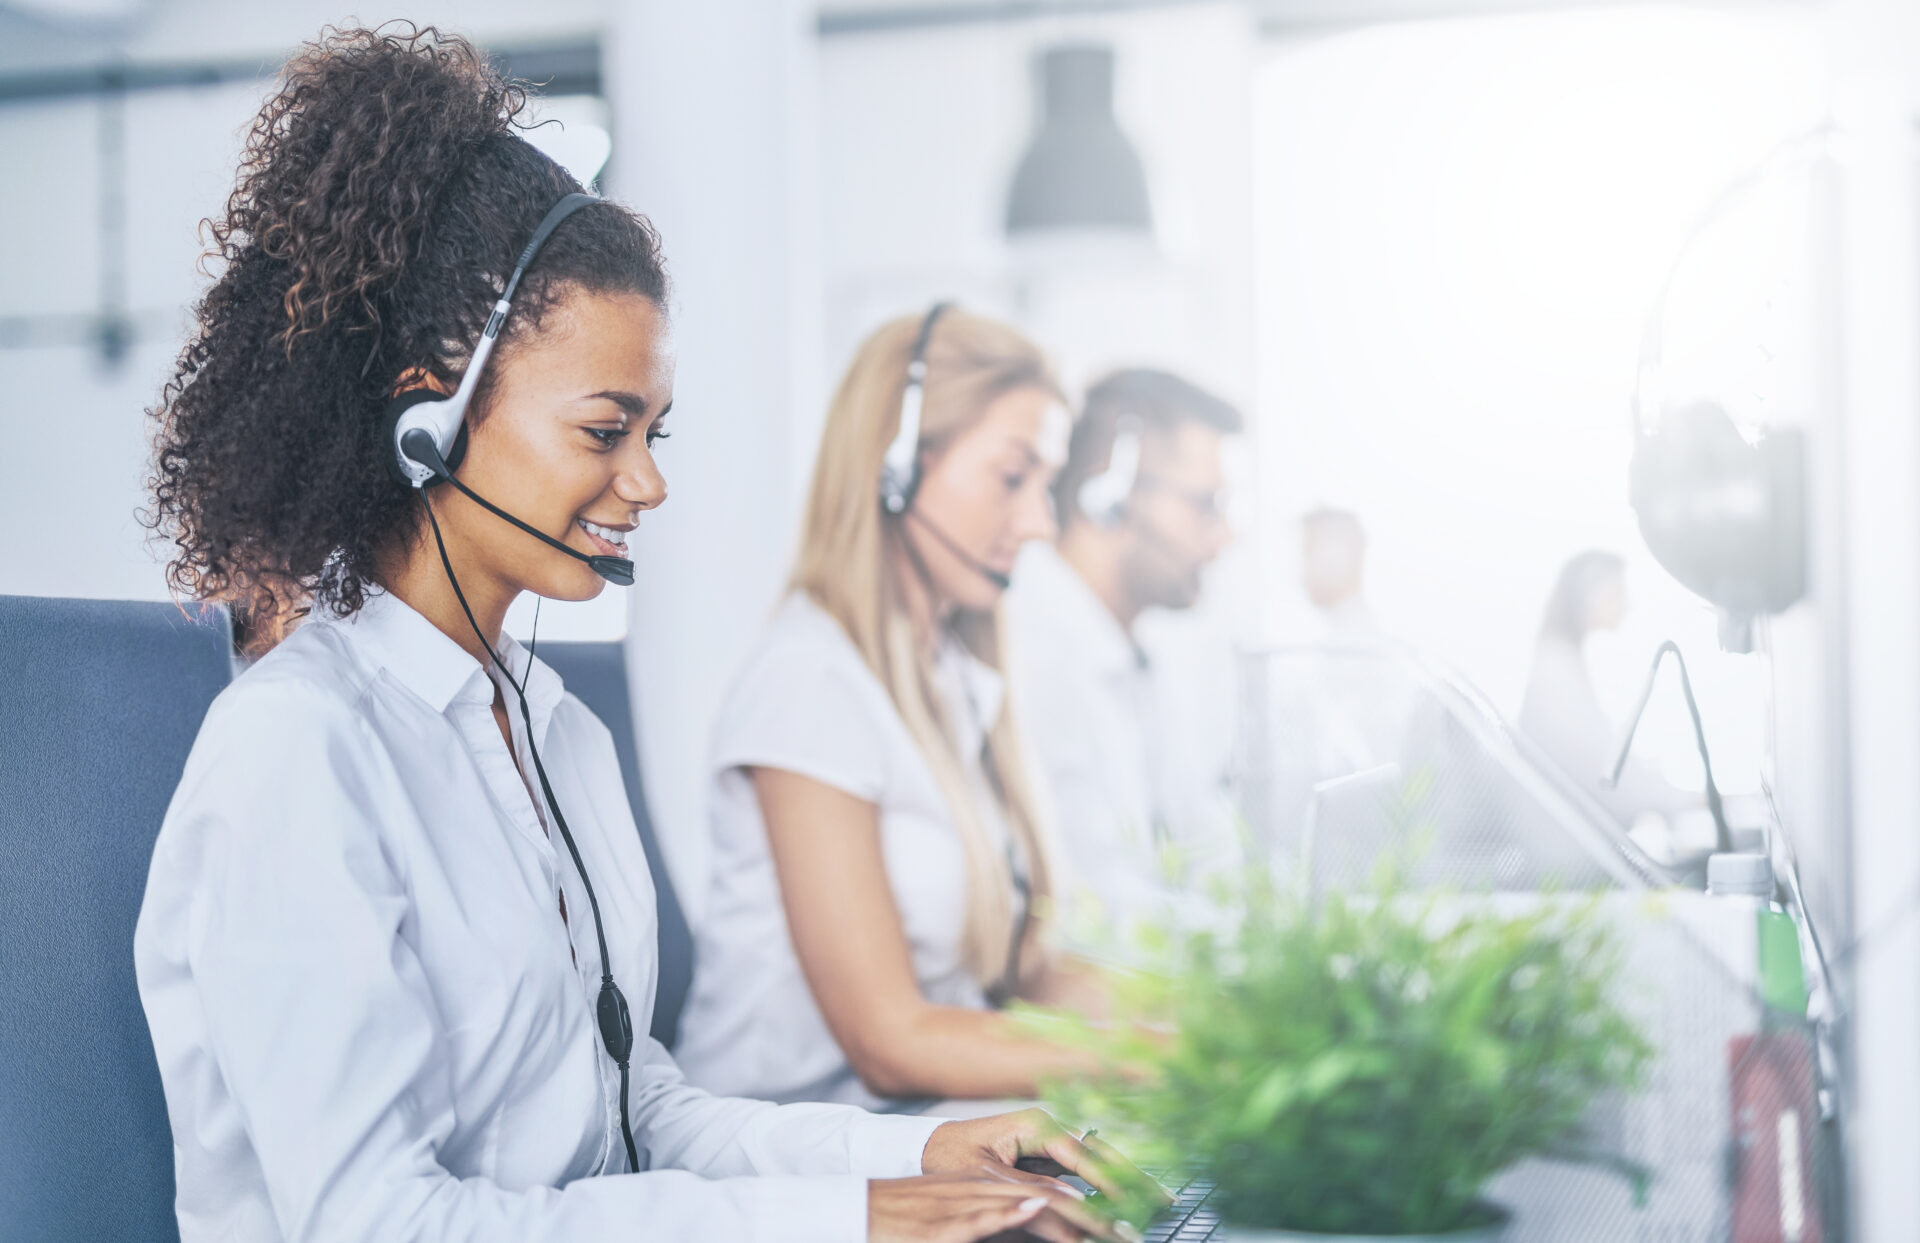 Call center worker with headset smiling